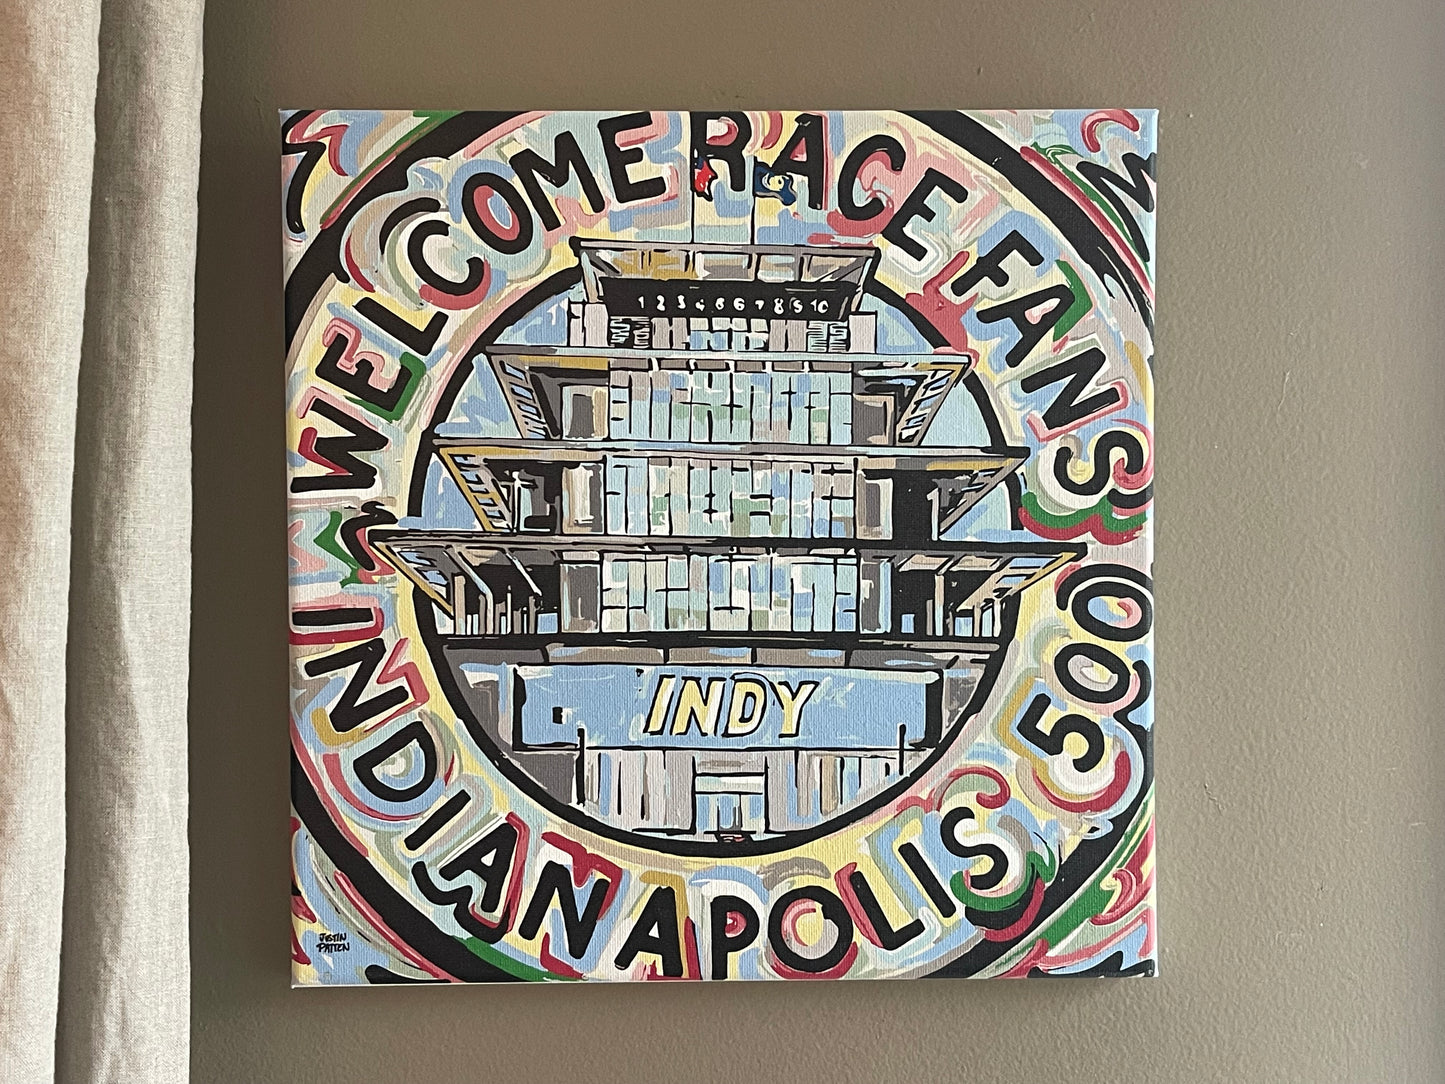 Indianapolis Motor Speedway 12"x12" Welcome Race Fans Pagoda Wrapped Canvas Print by Justin Patten